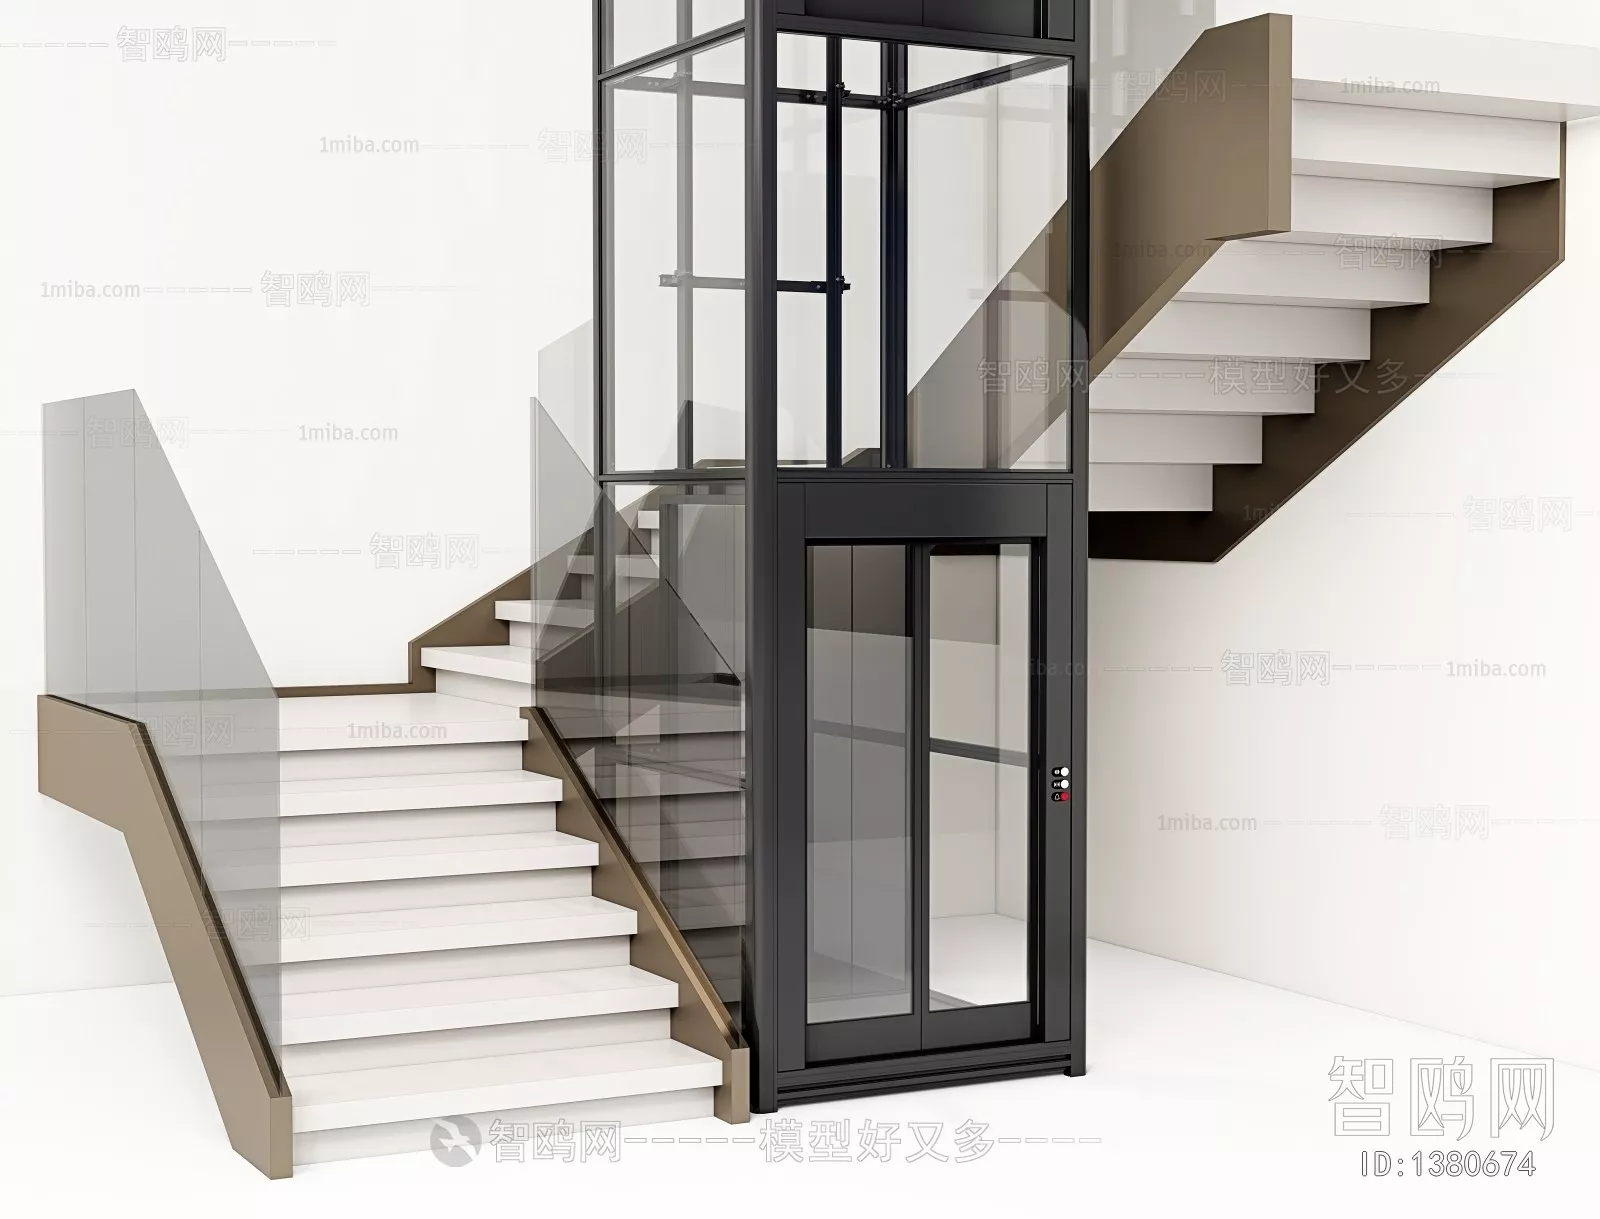 MODERN STAIR - SKETCHUP 3D MODEL - VRAY OR ENSCAPE - ID14209